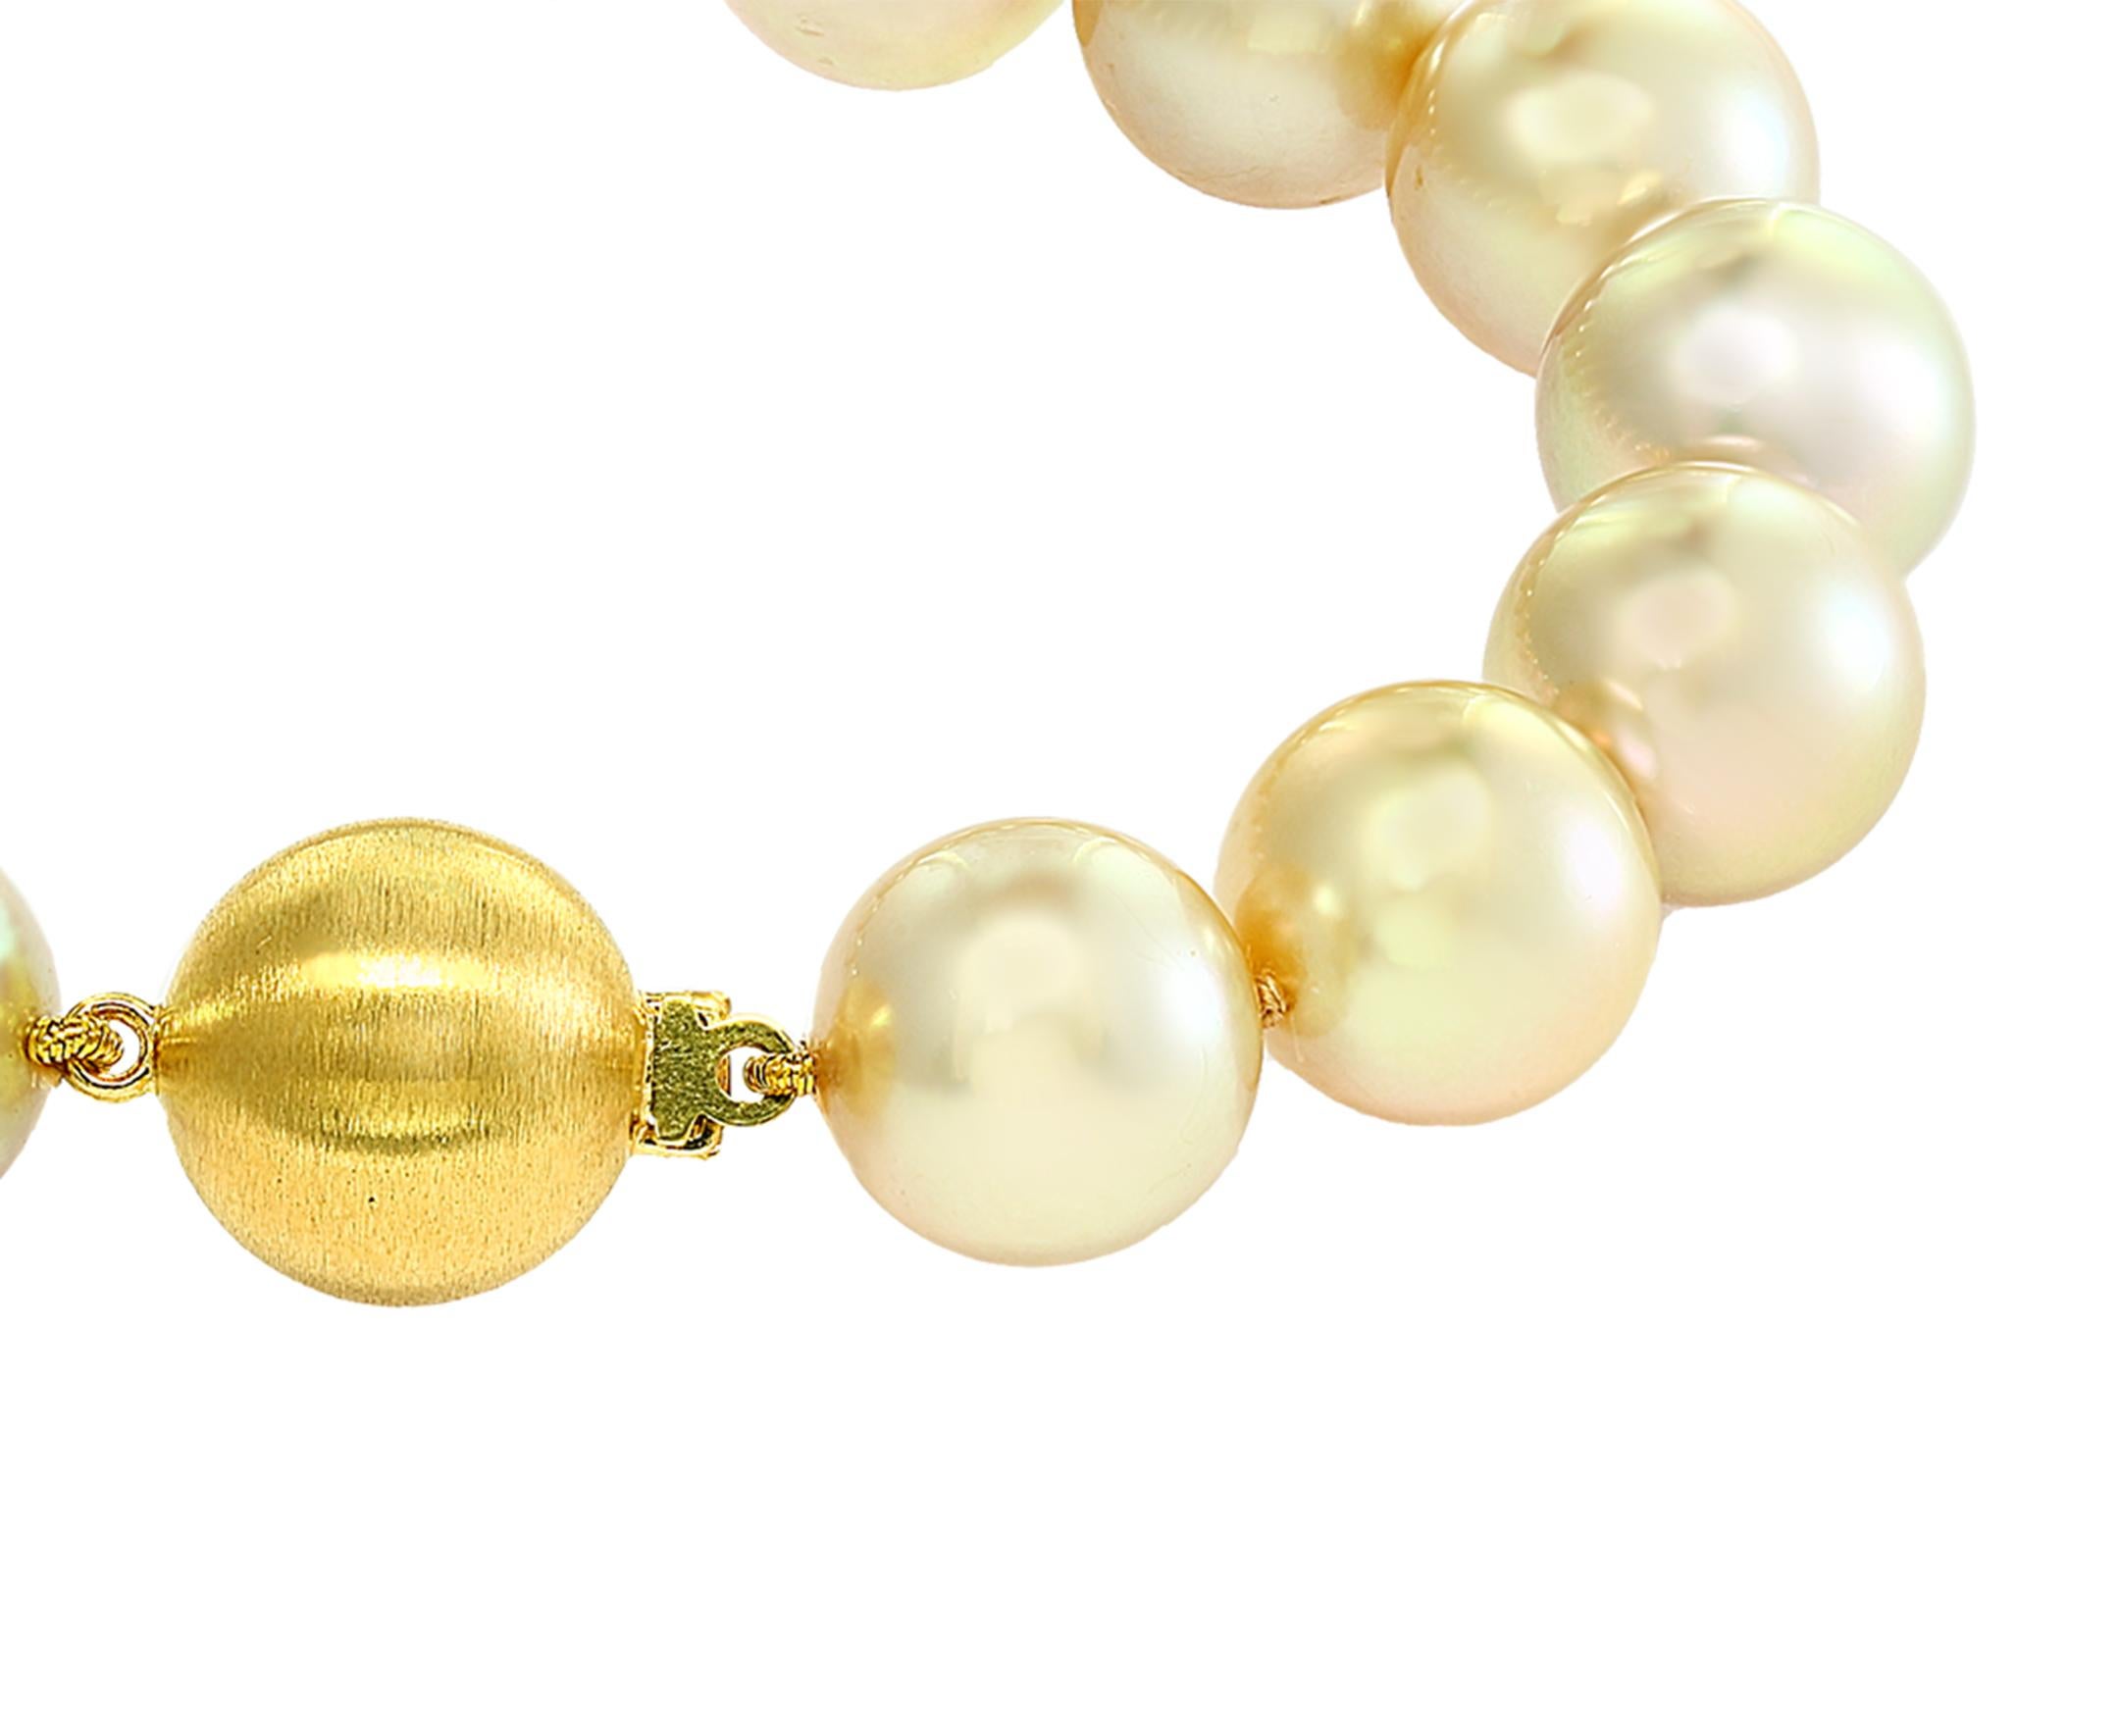 This South Sea champagne colored cultured pearl bracelet serves as an elegant complement to any outfit. The pearls measure 12-13mm and the clasp is sterling silver. 

